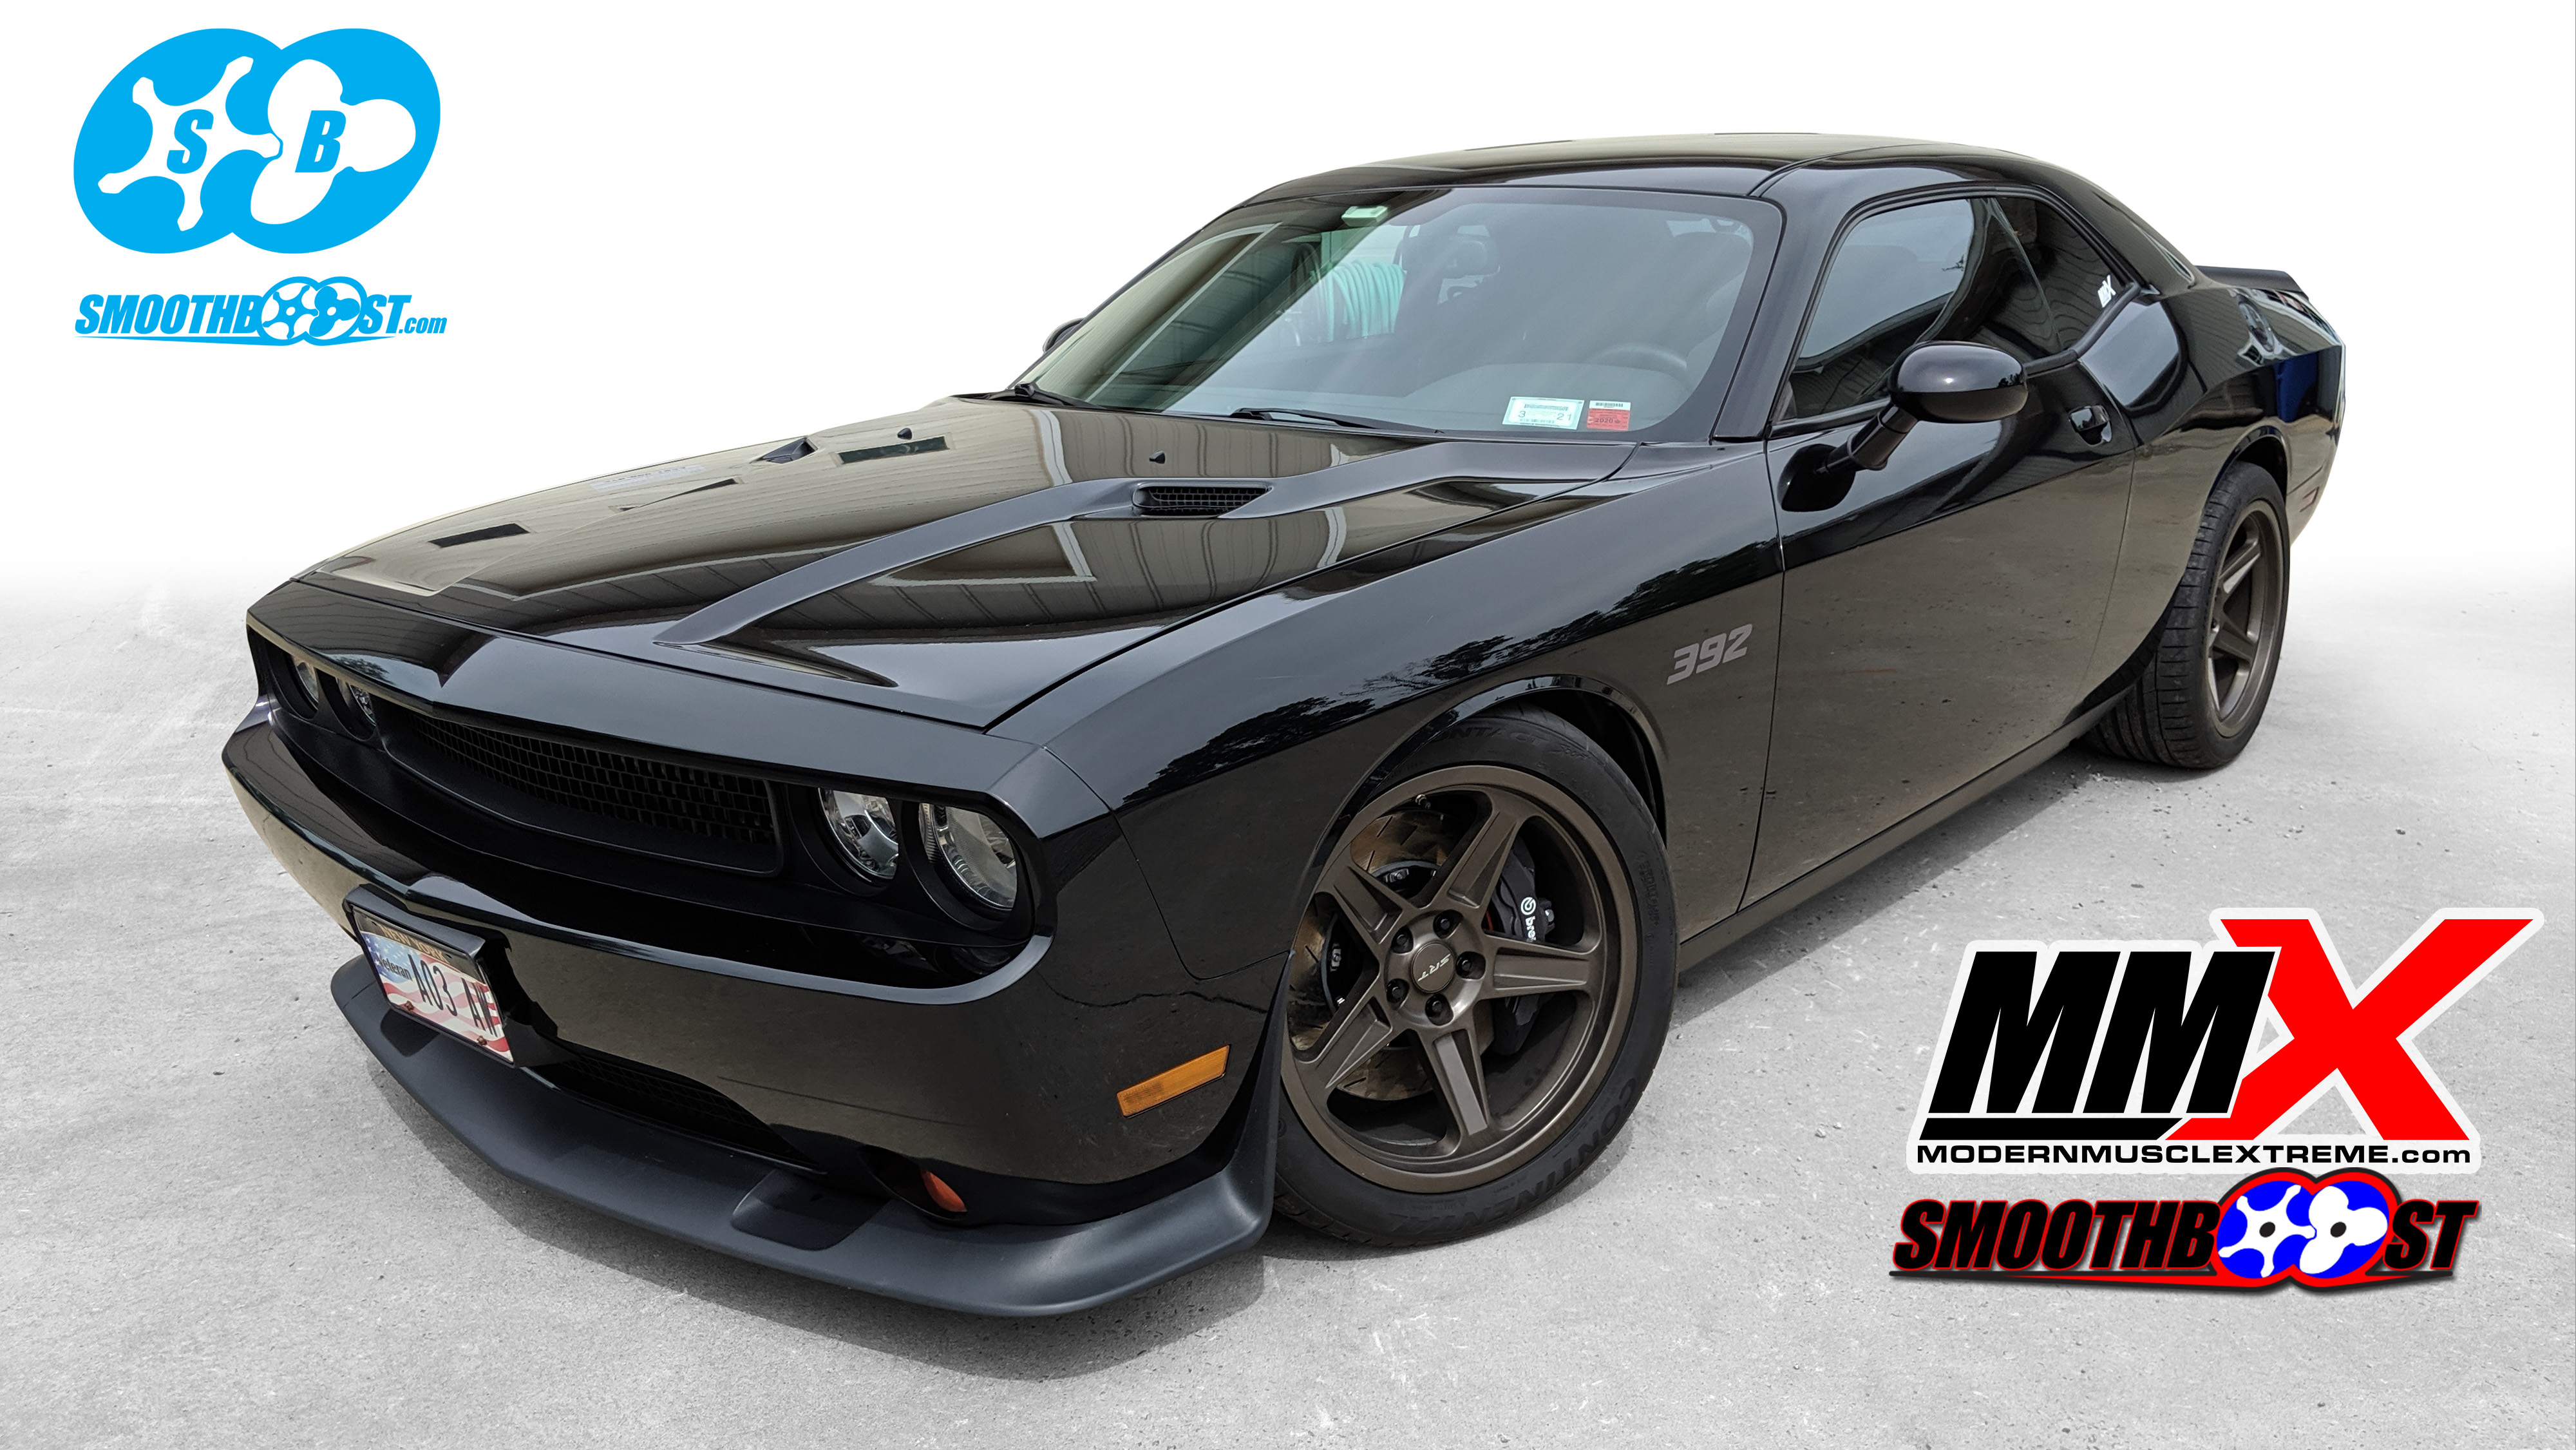 2014 Challenger 411 HEMI Stroker SmoothBoost Controlled Procharger Supercharged Build by MMX / ModernMuscleXtreme.com